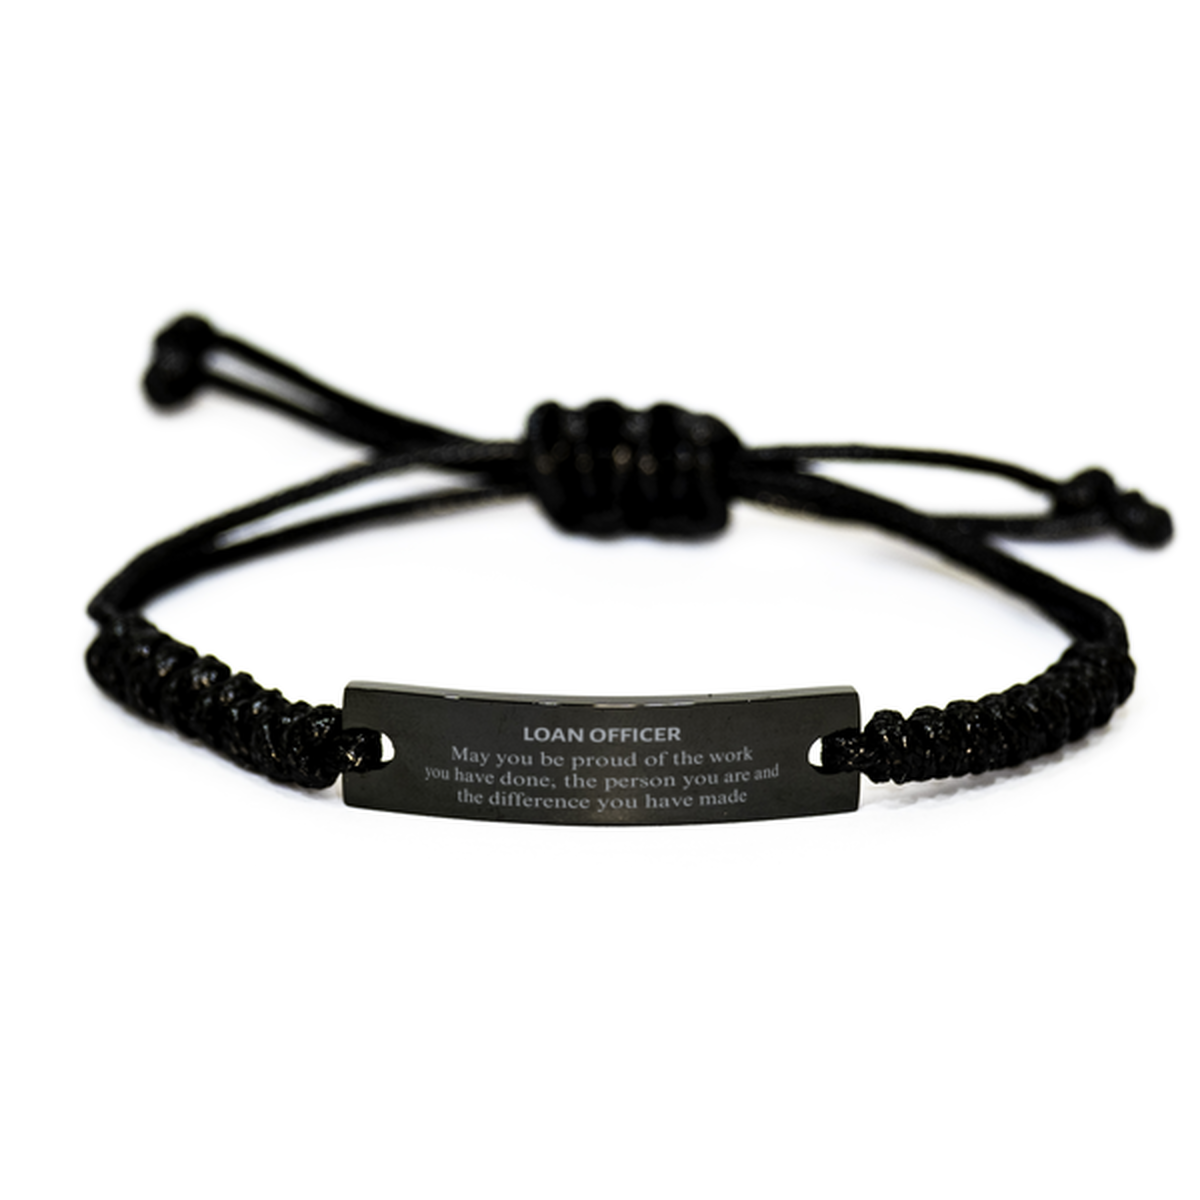 Loan Officer May you be proud of the work you have done, Retirement Loan Officer Black Rope Bracelet for Colleague Appreciation Gifts Amazing for Loan Officer